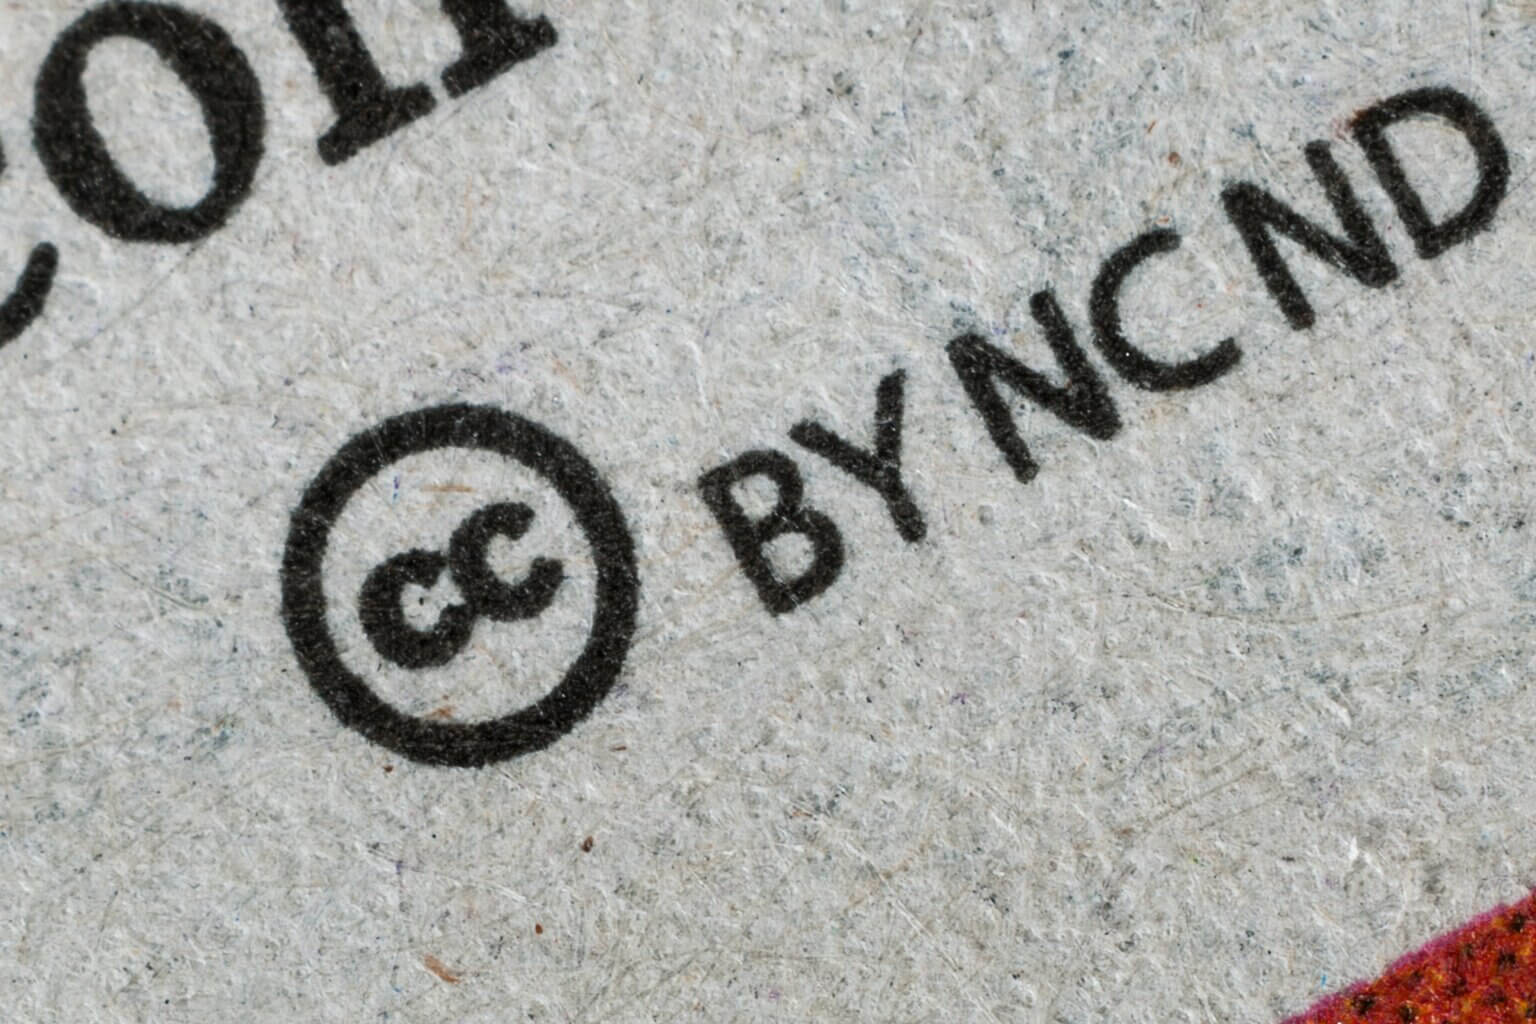 Photograph of a Creative Commons license mark, a type of copyright license.